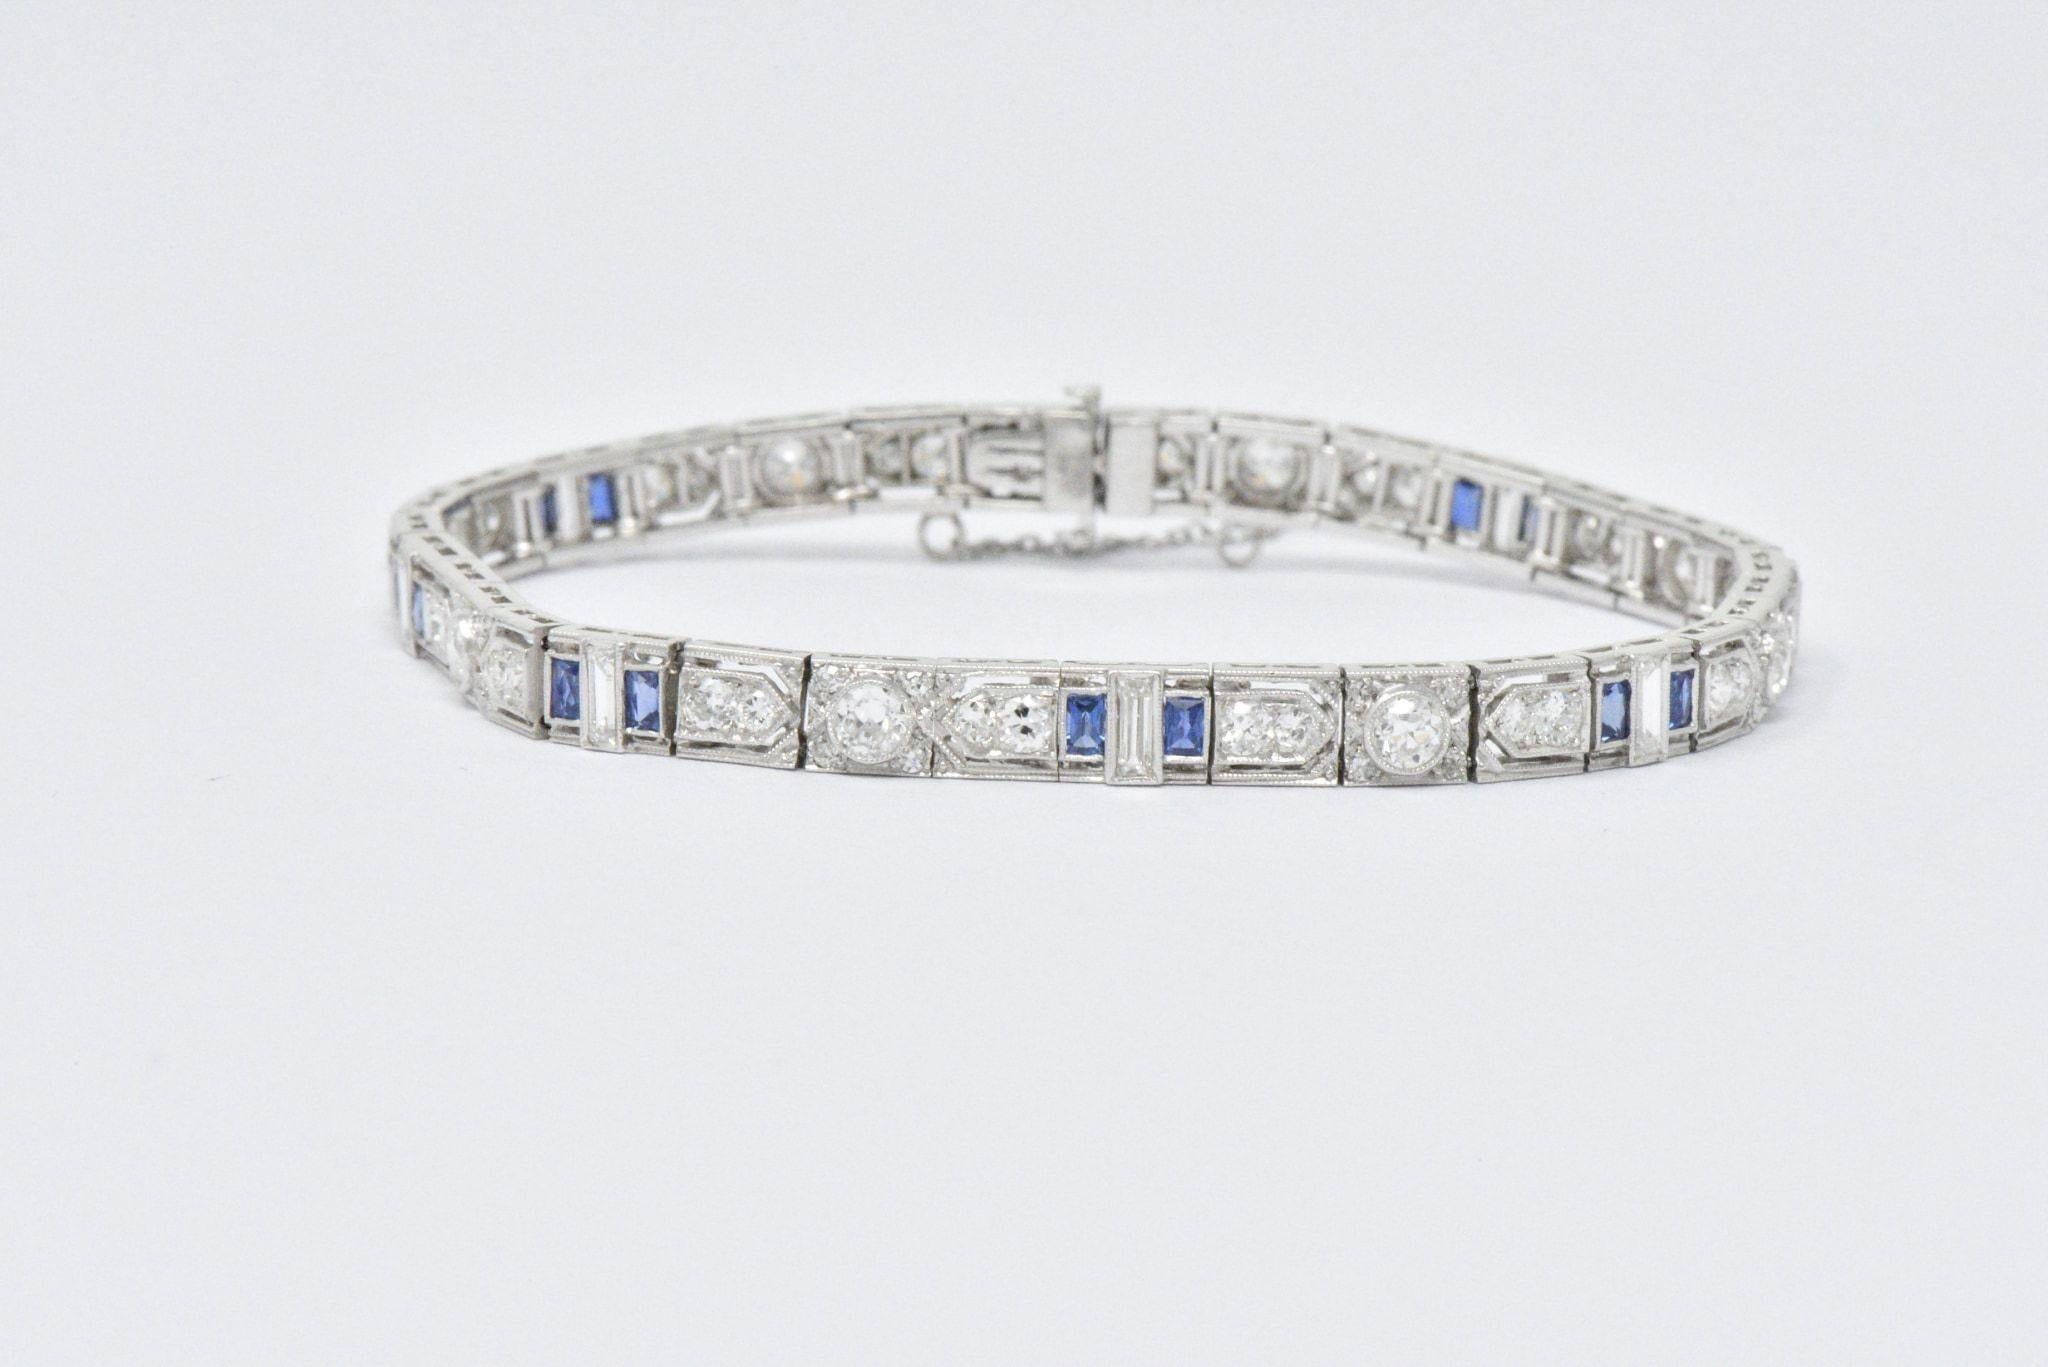 Set with old European, full, single and baguette cut diamonds, approximately 3.44 carats total, G to J color and VS to I clarity
With rectangular French cut sapphires, approximately 1.60 carats total, bright blue, very well matched
With pierced